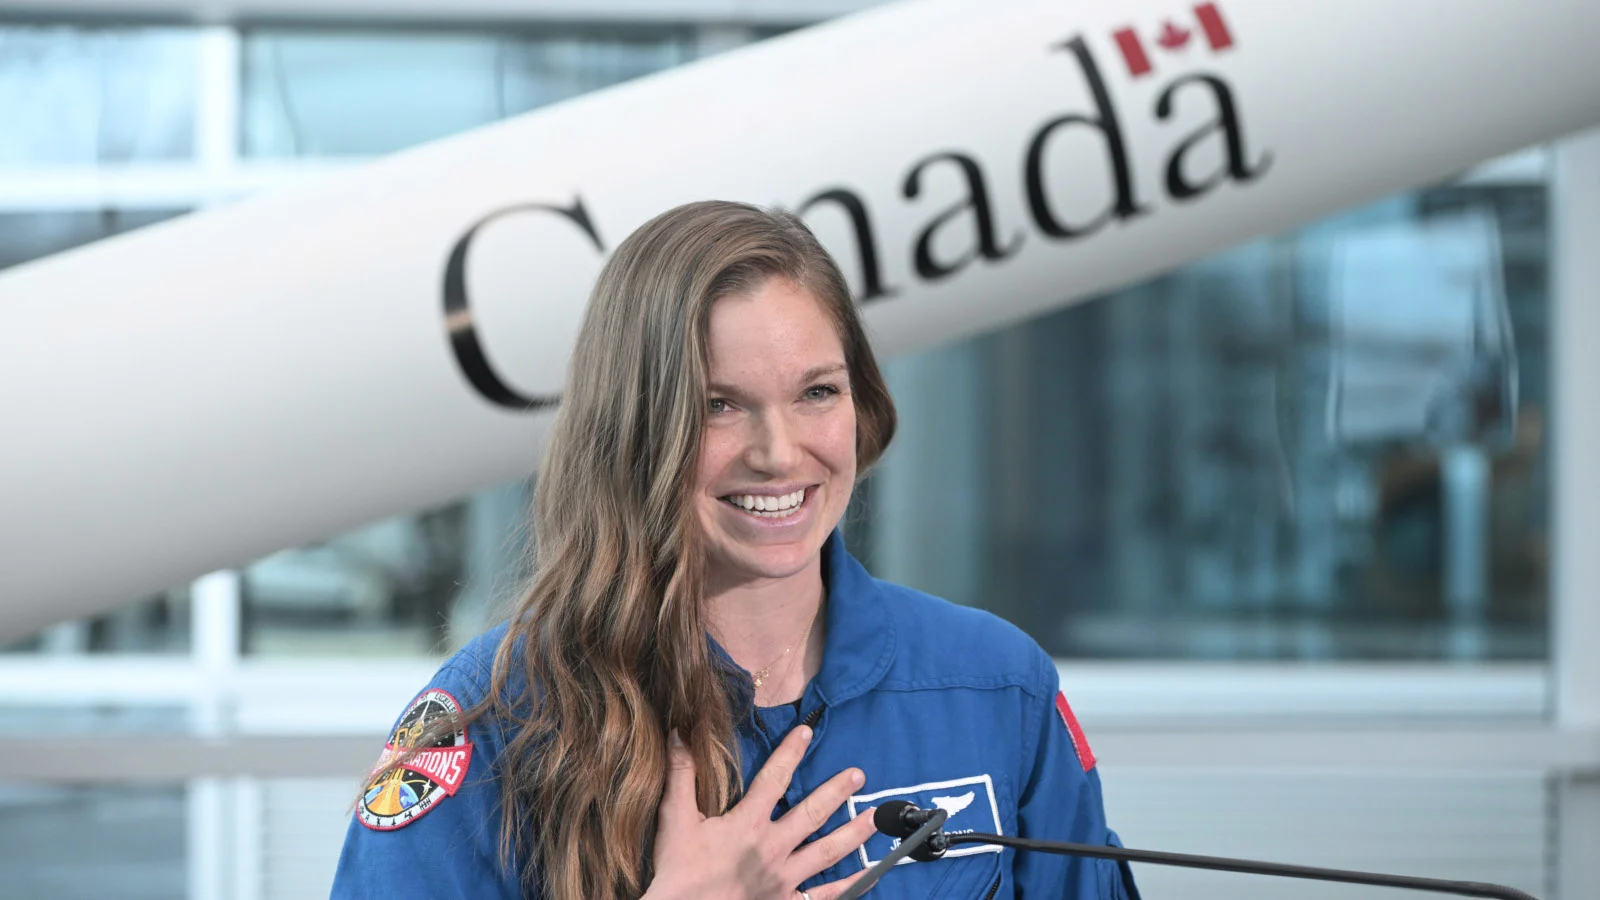 CSA astronaut Jenni Gibbons is the Canadian backup astronaut for Artemis II